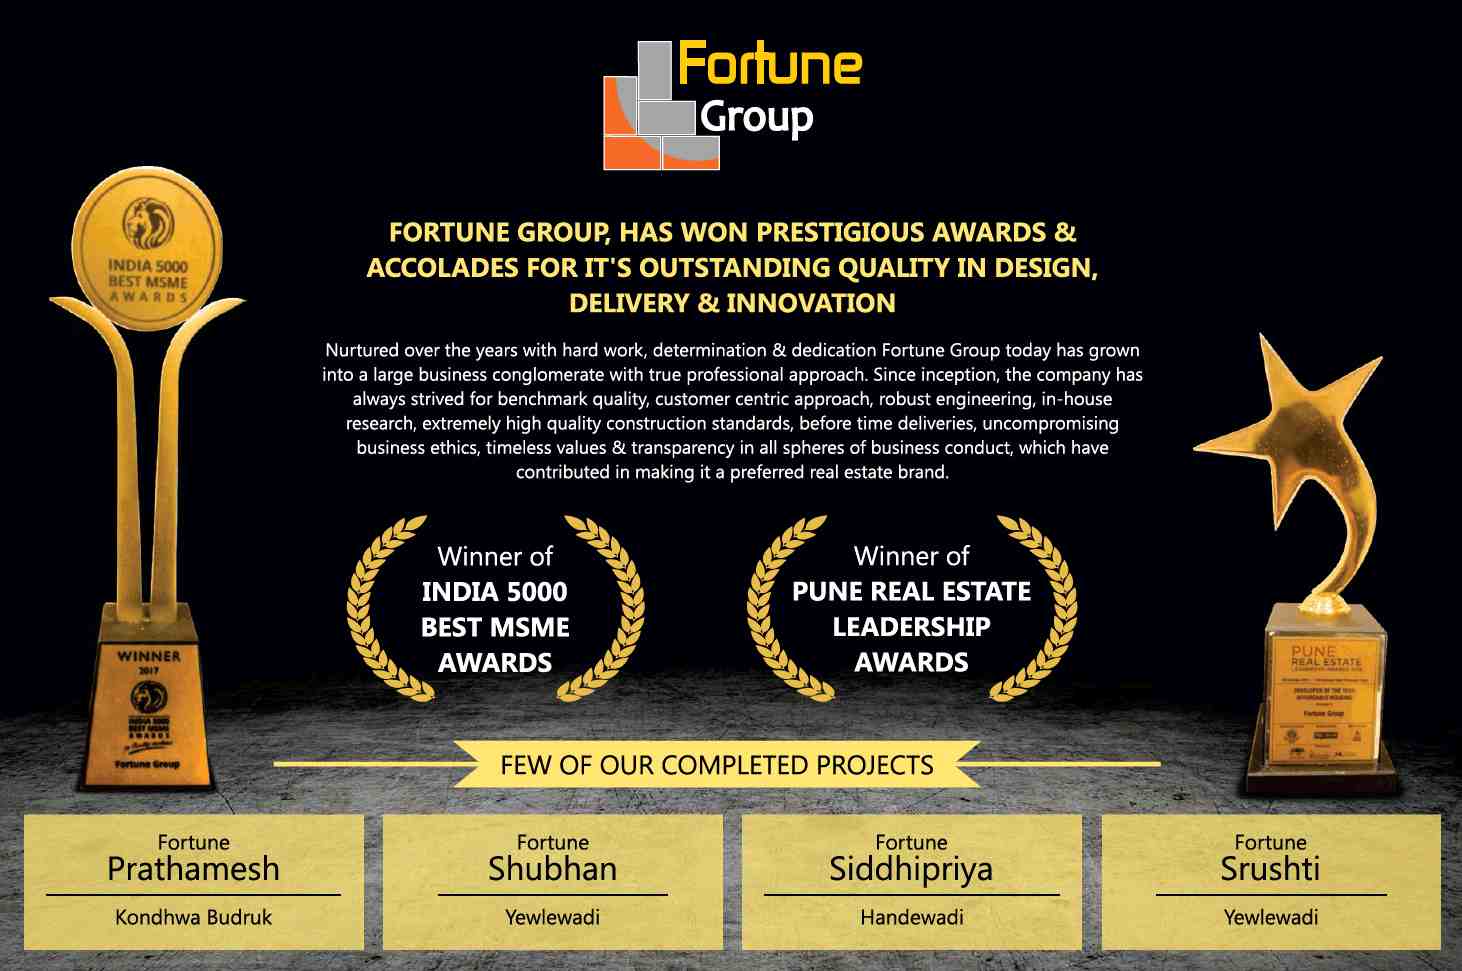 Fortune Group won prestigious awards for it's outstanding quality in design, delivery & innovation Update